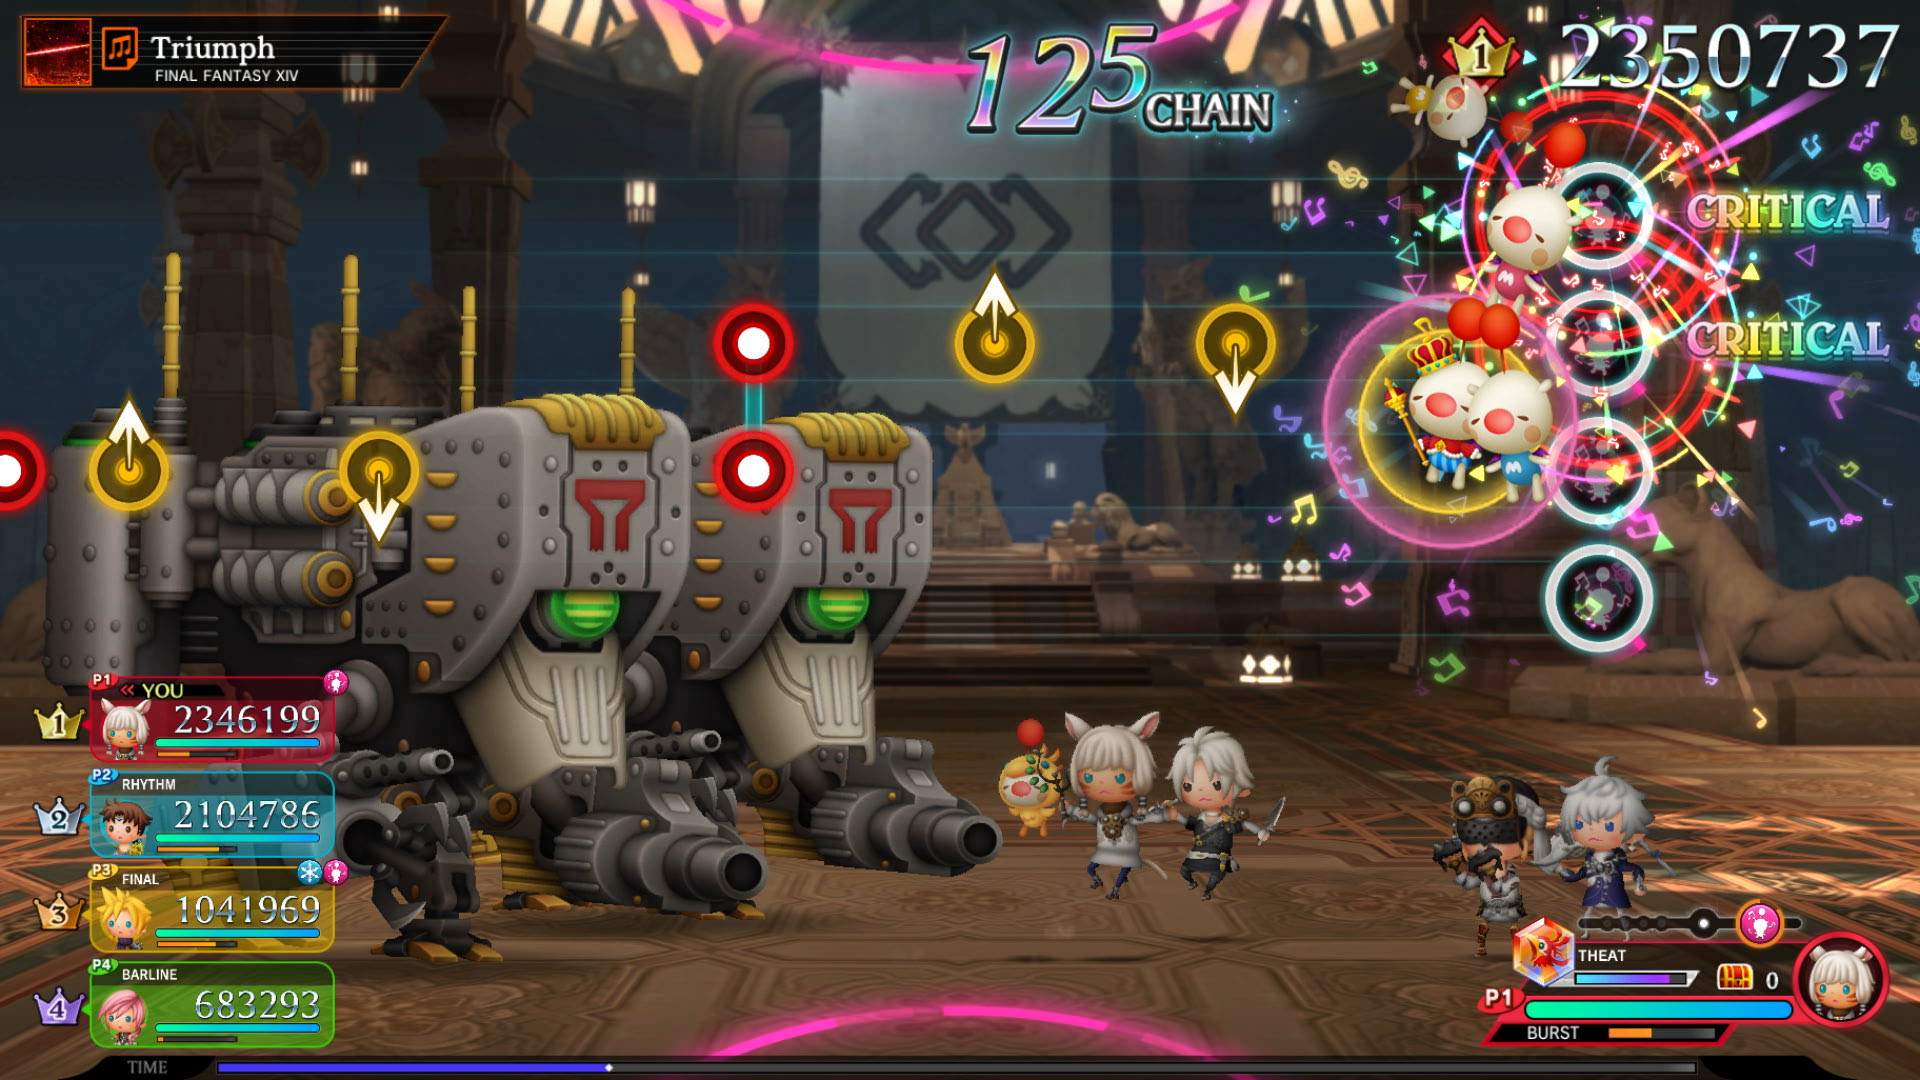 Gameplay screenshot of a battle set to the music of triumph from FINAL FANTASY 14